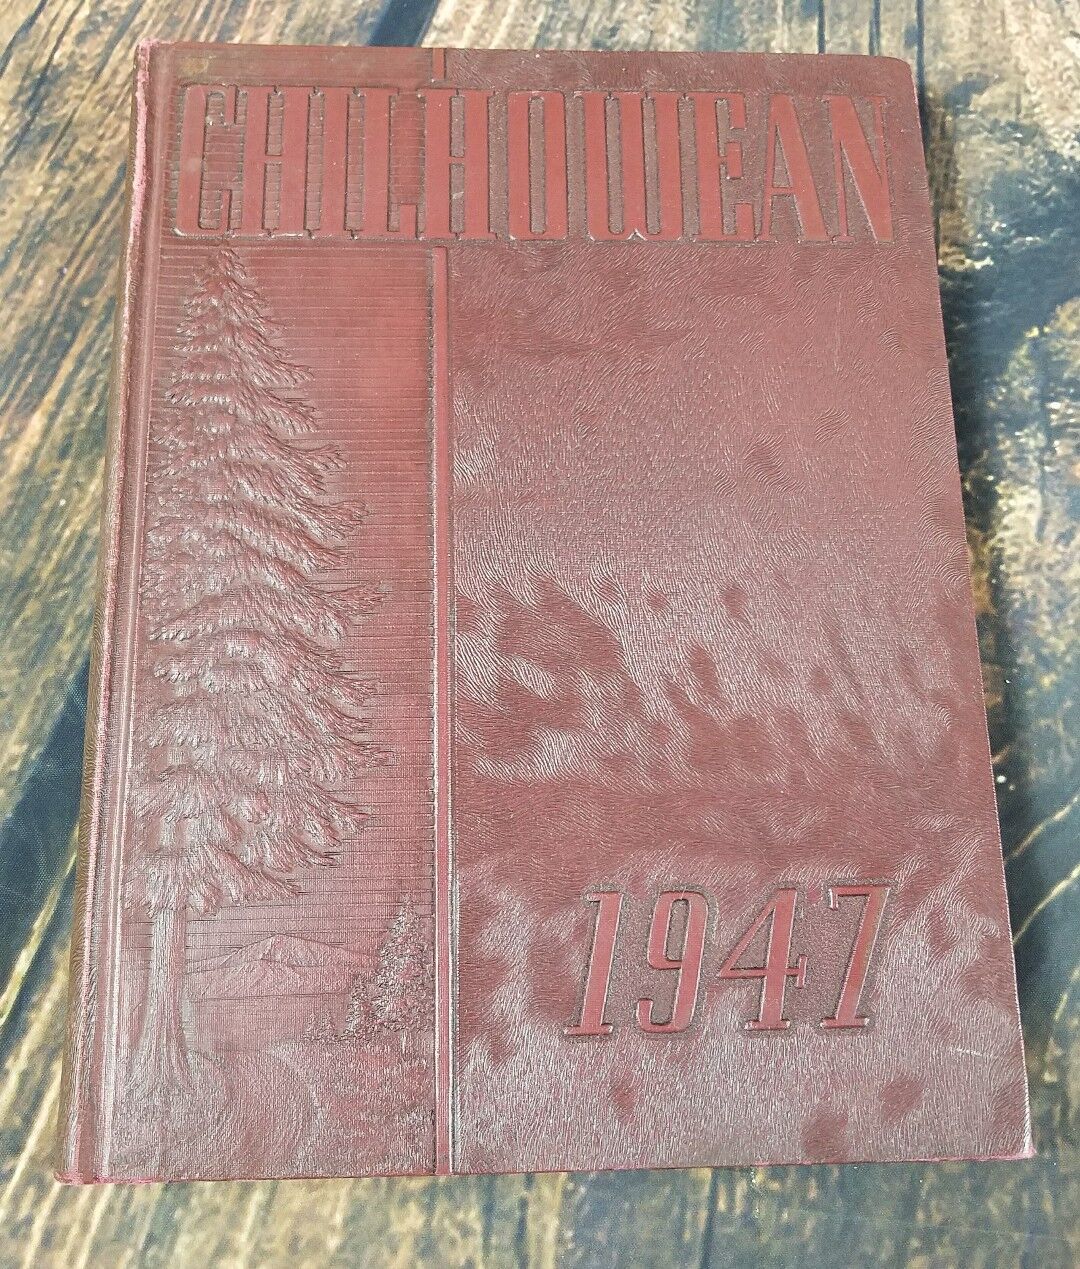 1947 Maryville College Tennessee The Chilhowean Annual Yearbook Tennessee USA